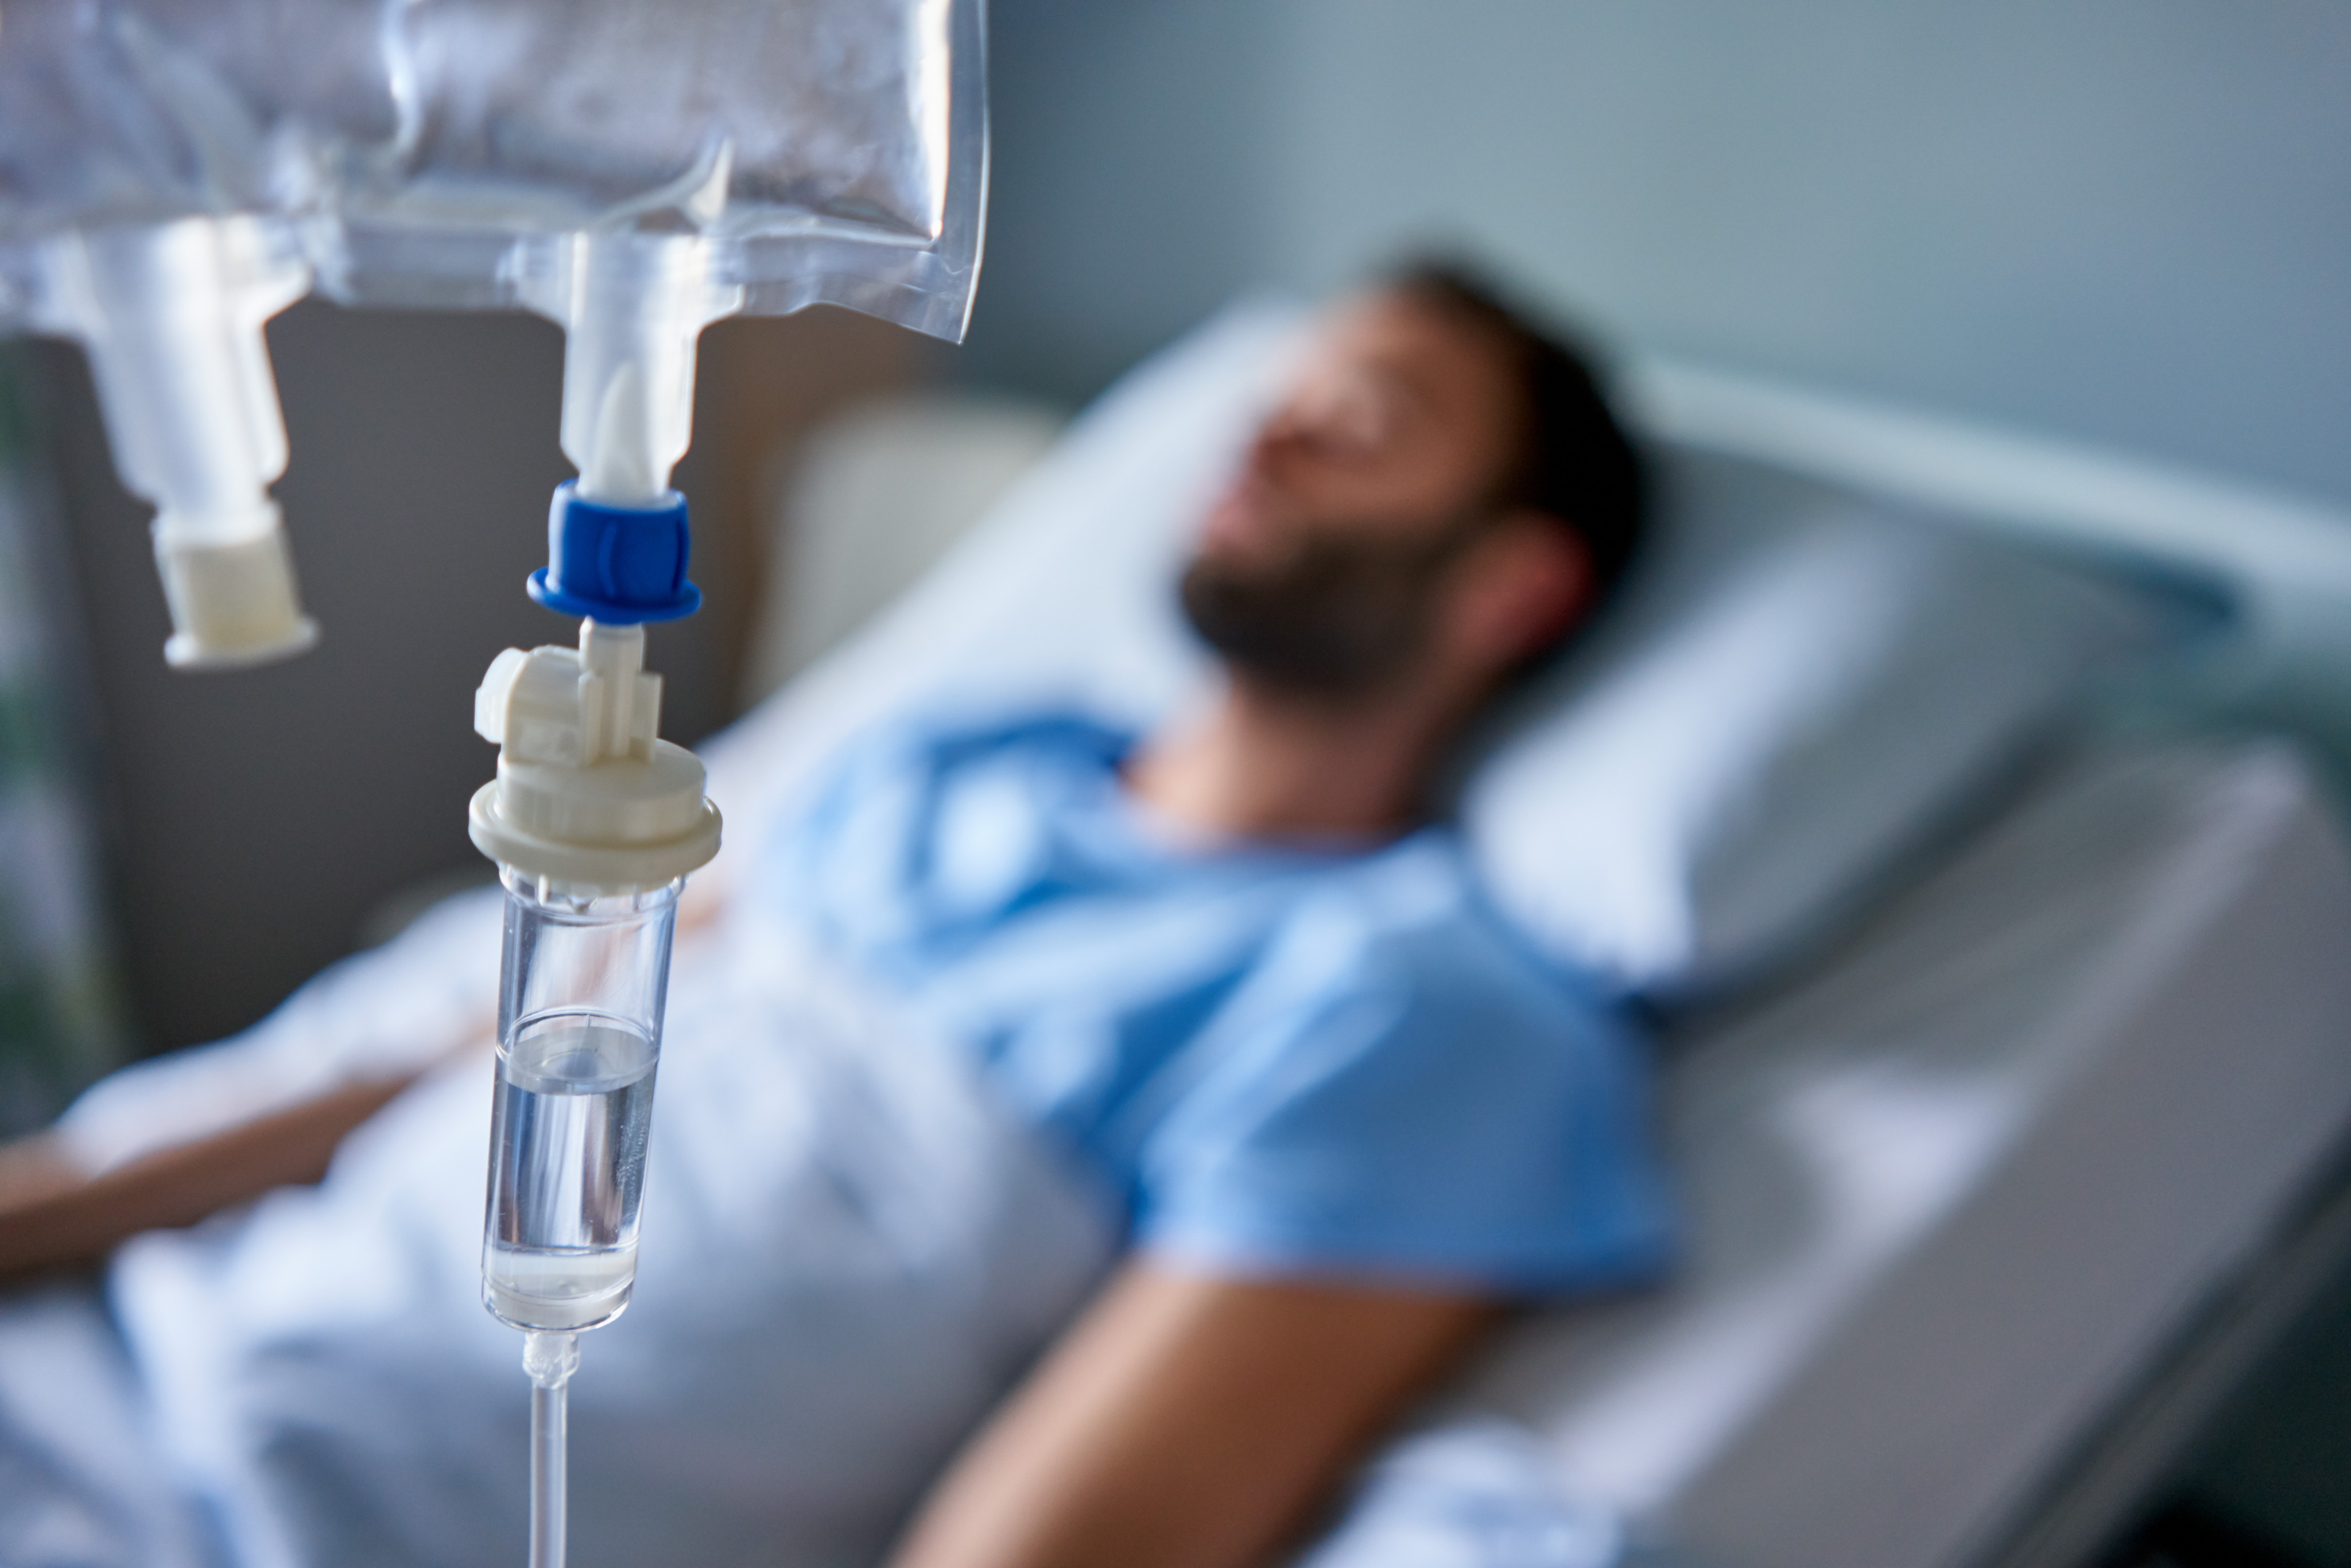 A saline drip was one of the treatments given to type 1 diabetic Simon O’Reilly when he experienced diabetic ketoacidosis. Photo: Shutterstock